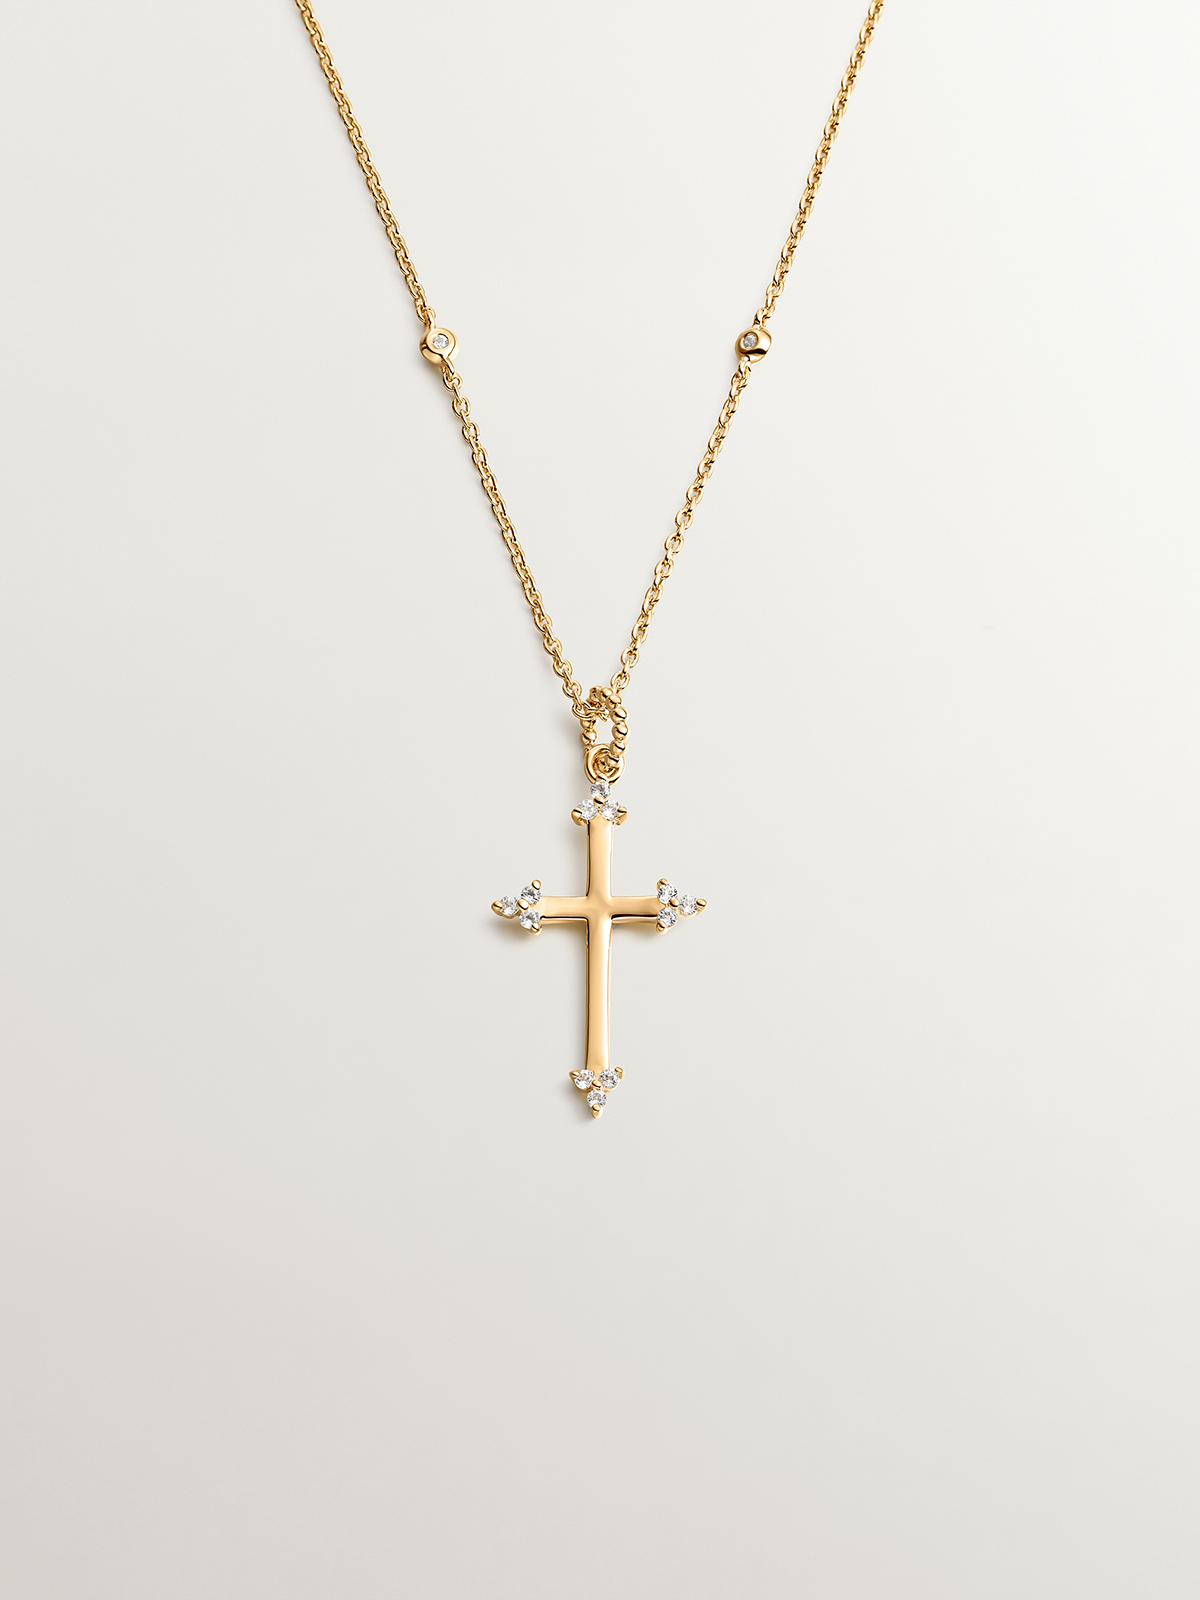 925 Silver pendant dipped in 18K yellow gold featuring a cross and white topazes.